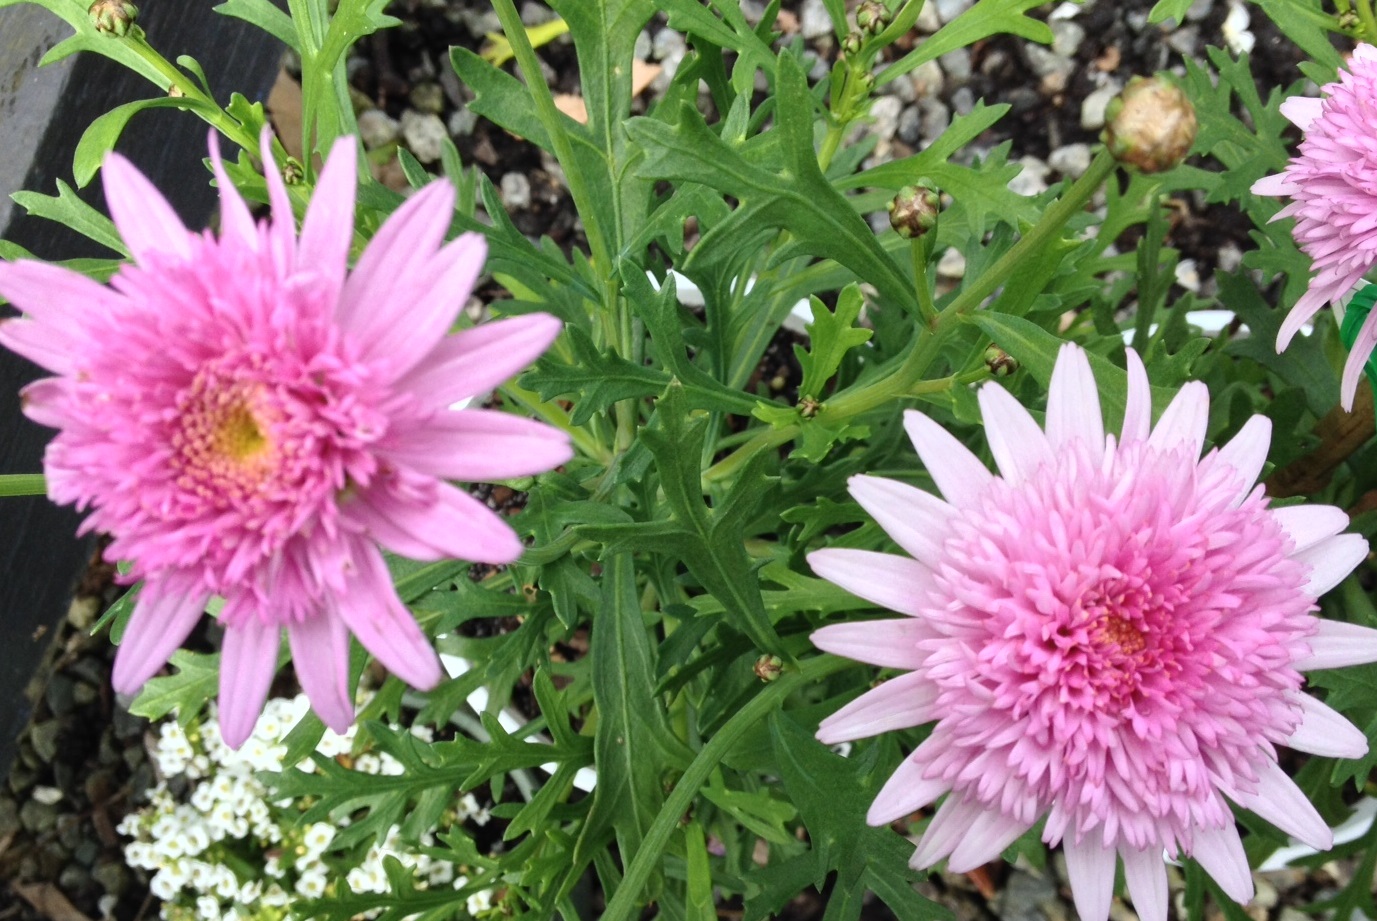 Chrysanthemum Double Pink Common Name – Marguerite or Paris Daisy 